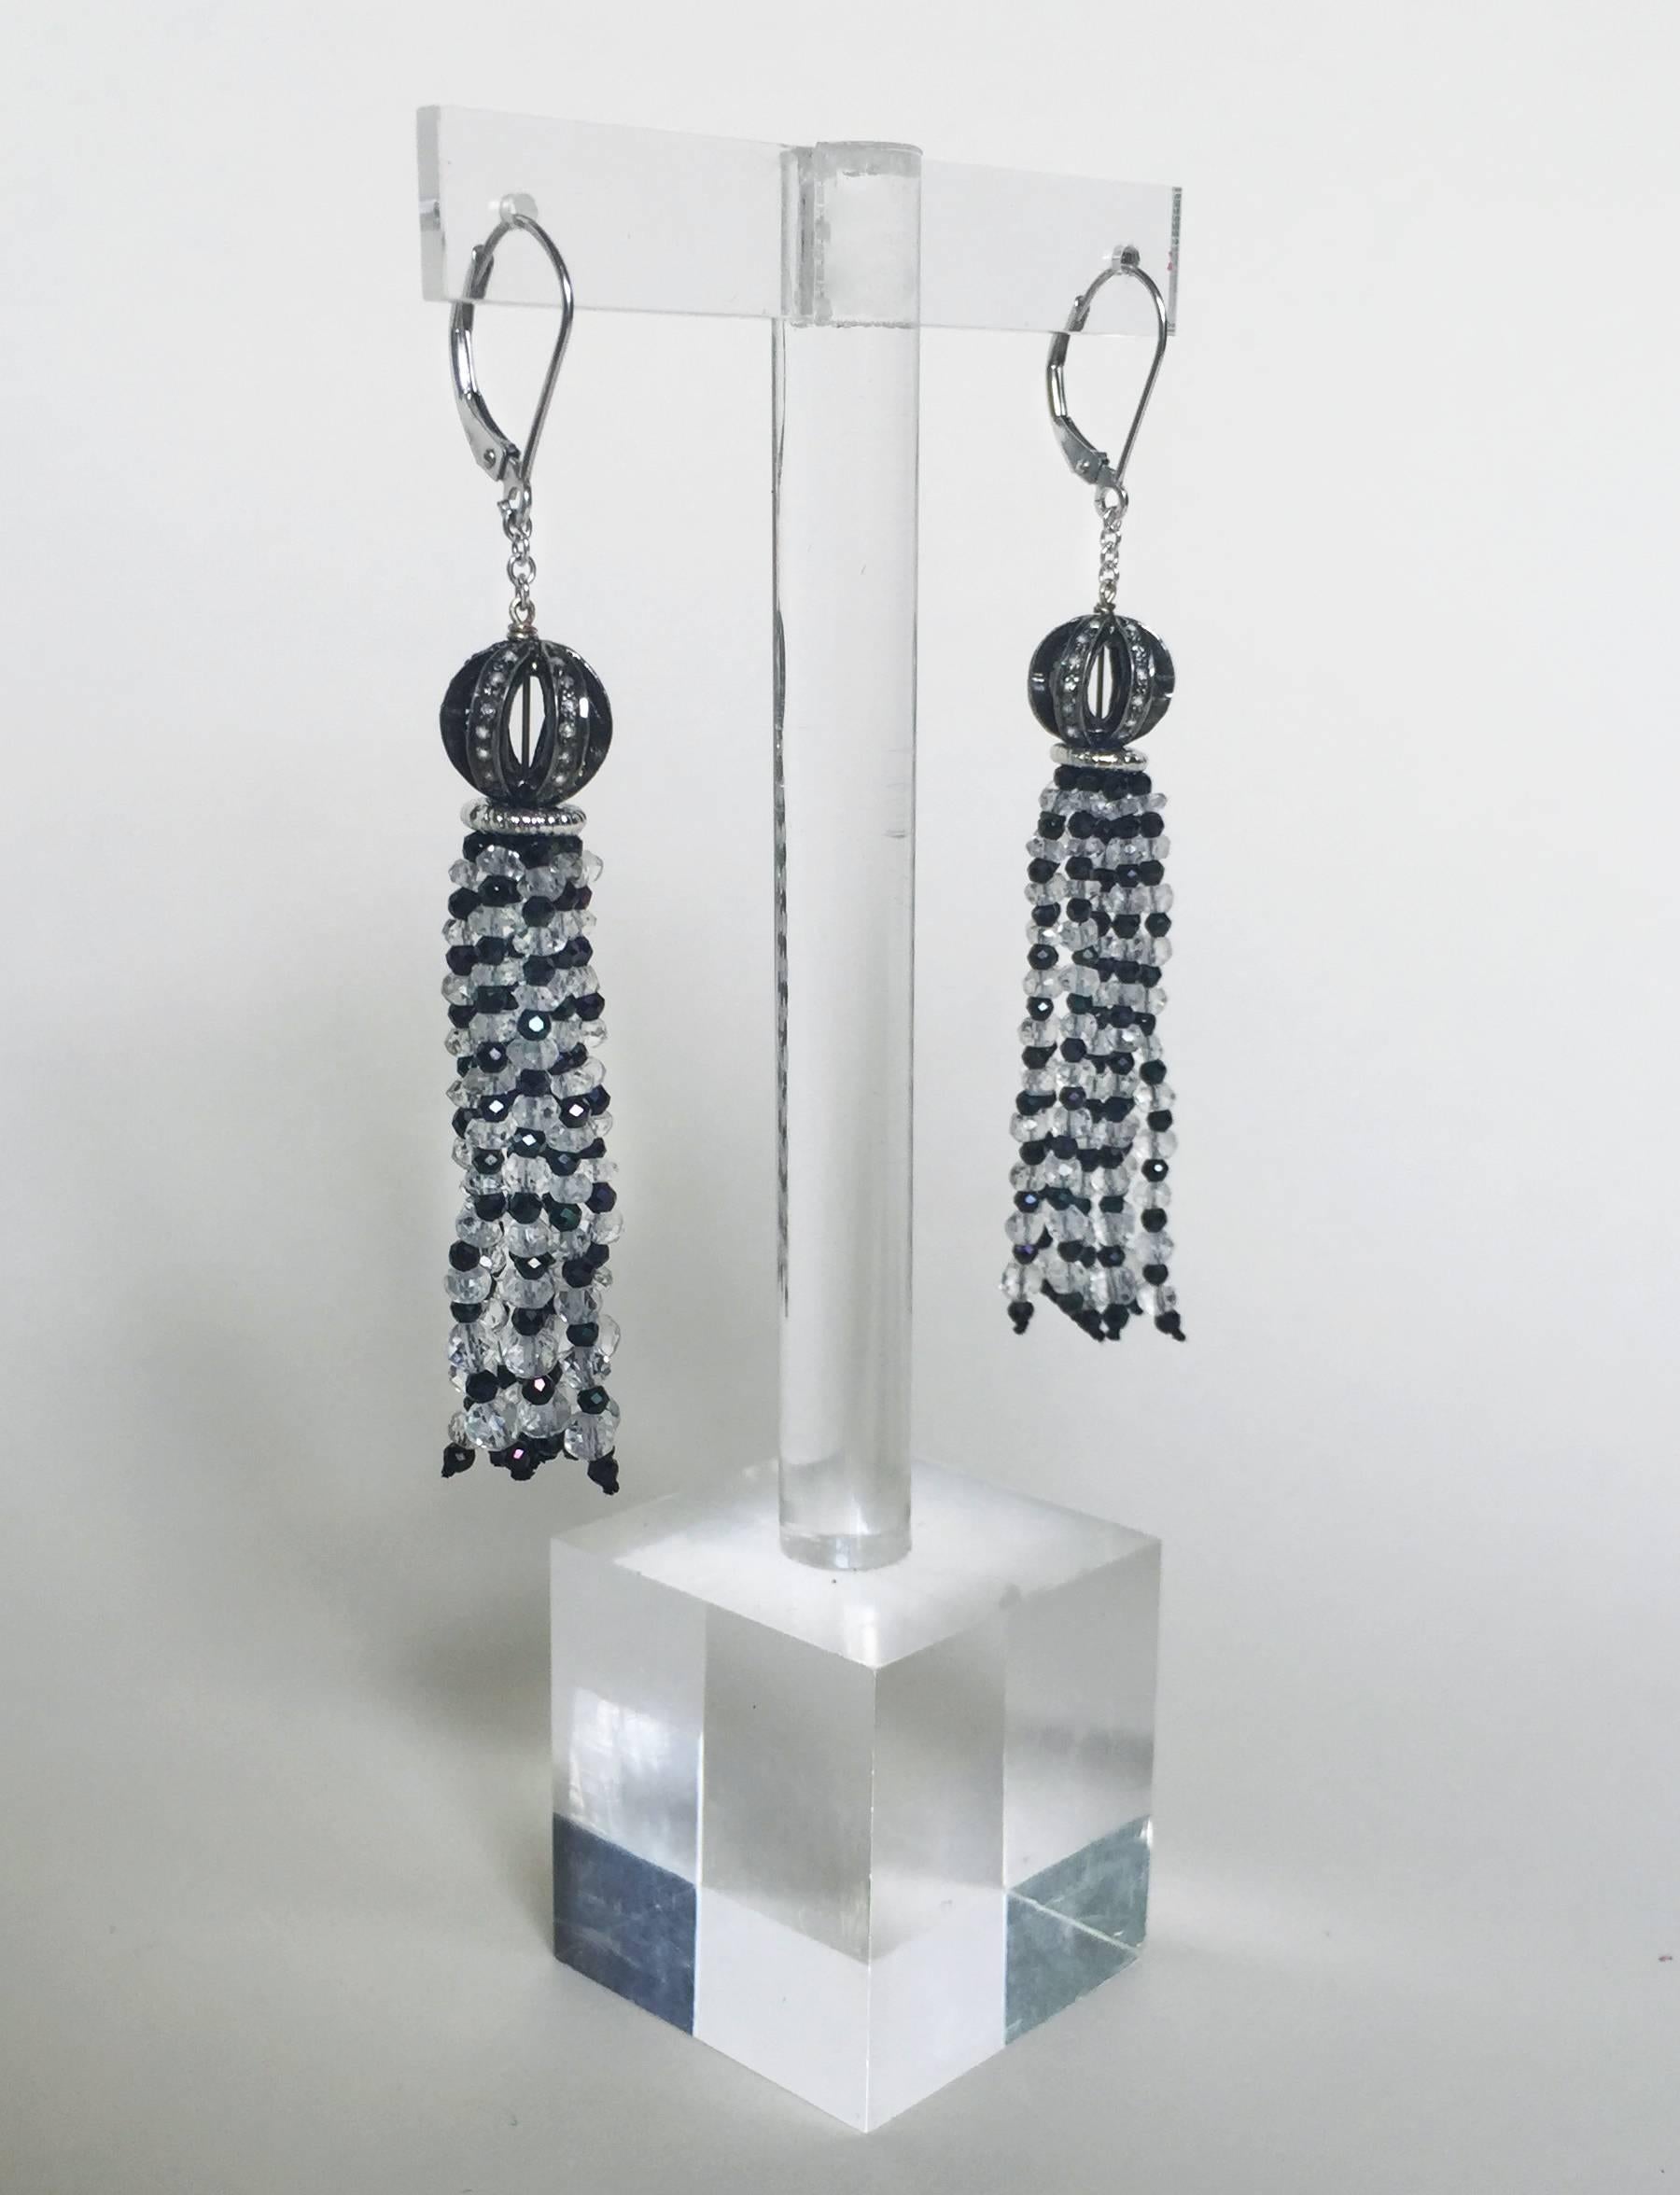 Art Deco Diamond Encrusted Ball Earrings with Quartz and Black Spinel Tassels by Marina J